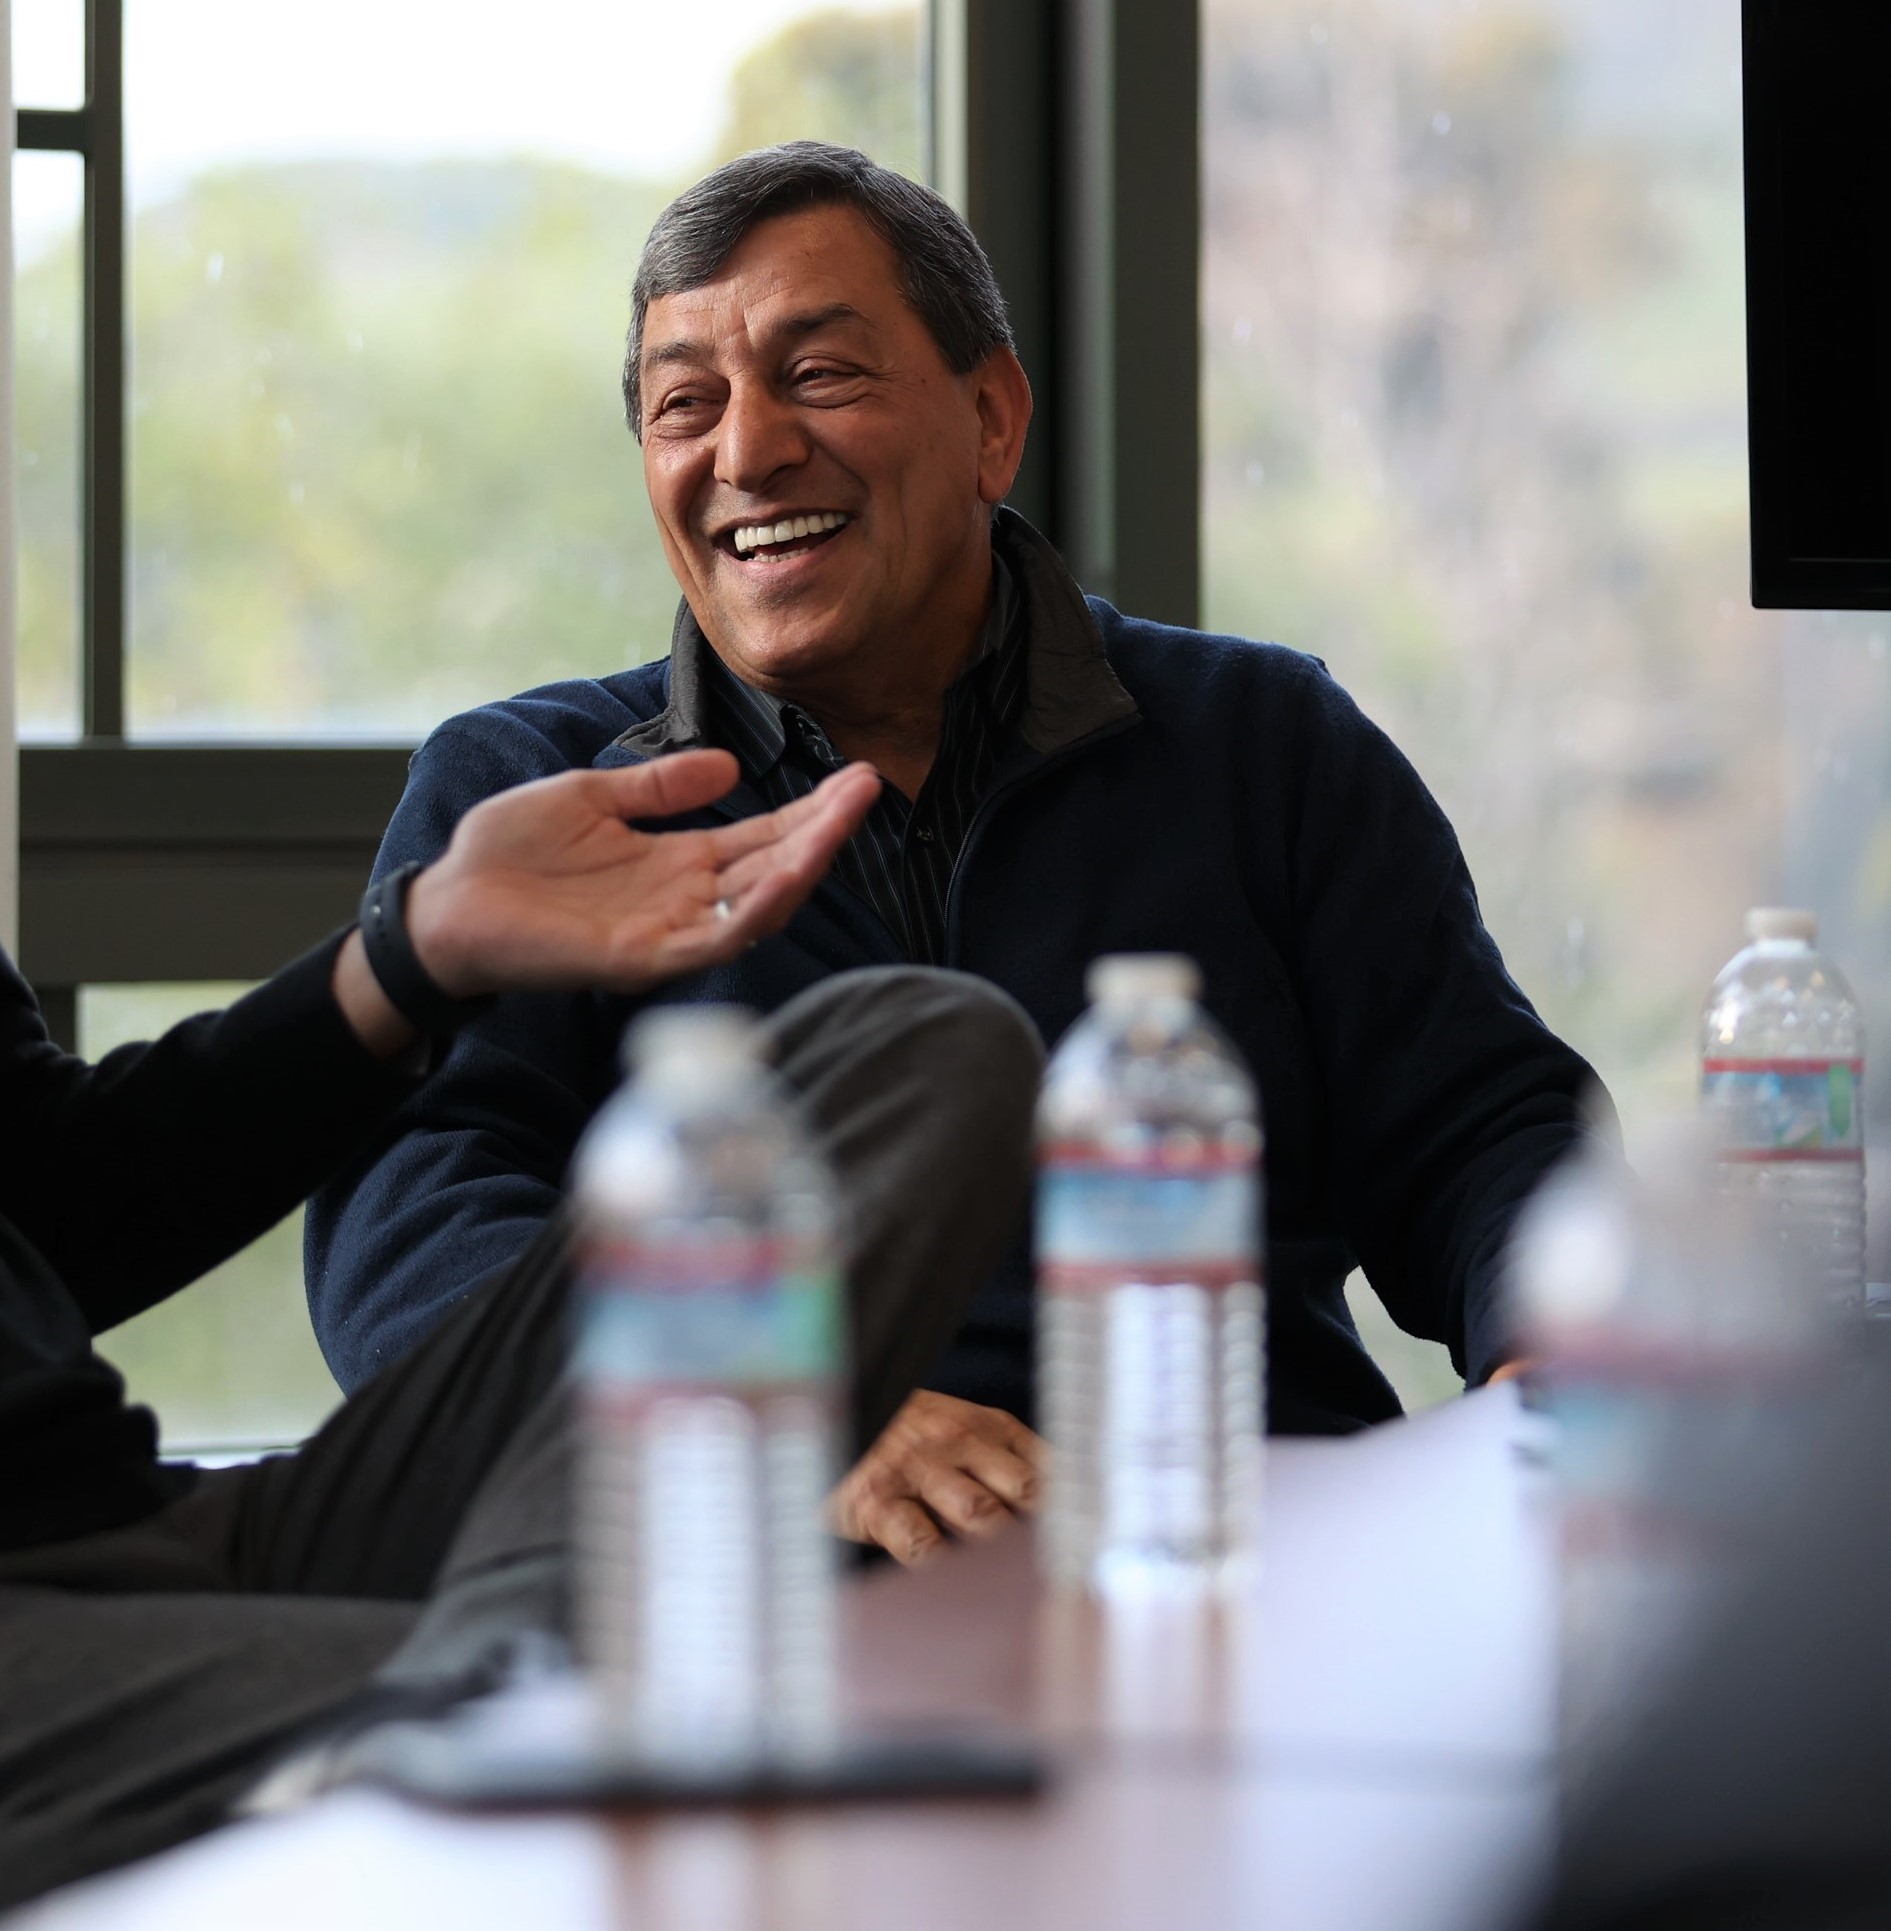 Professor Cyrus Ramezani laughs with colleagues at a conference table.